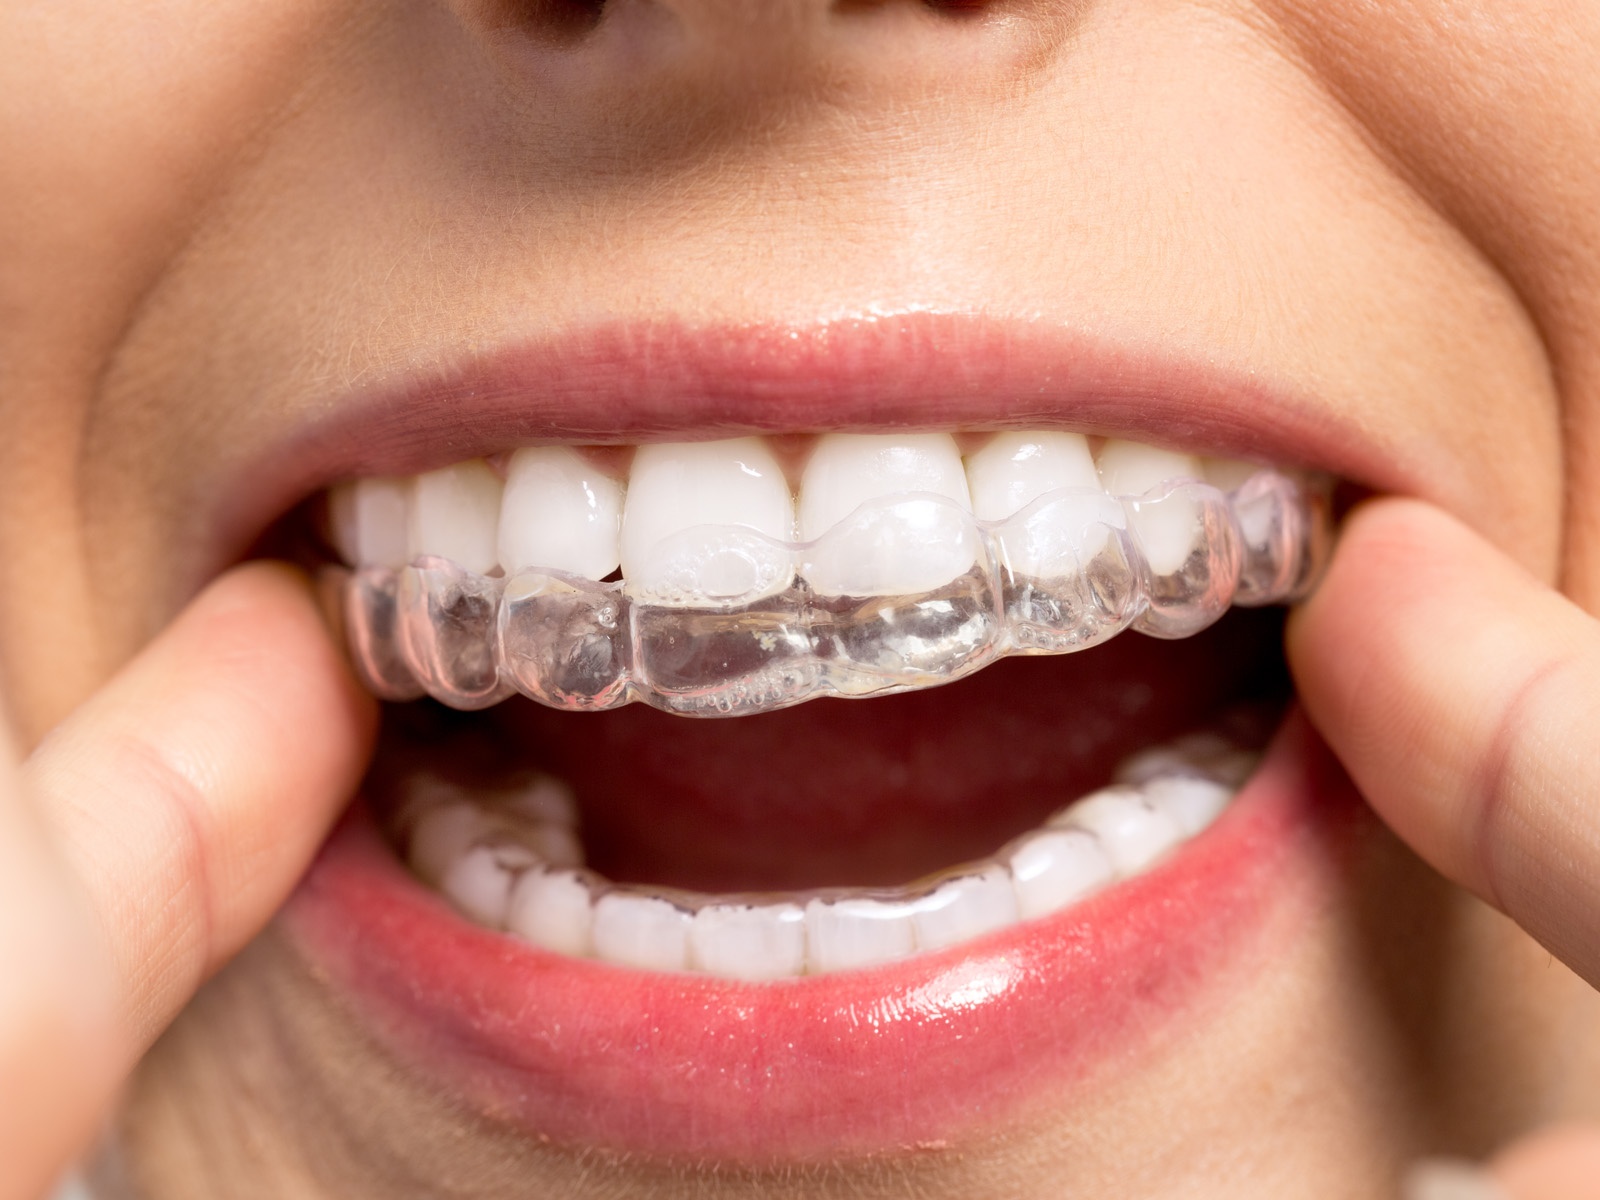 How should teeth look after Invisalign?